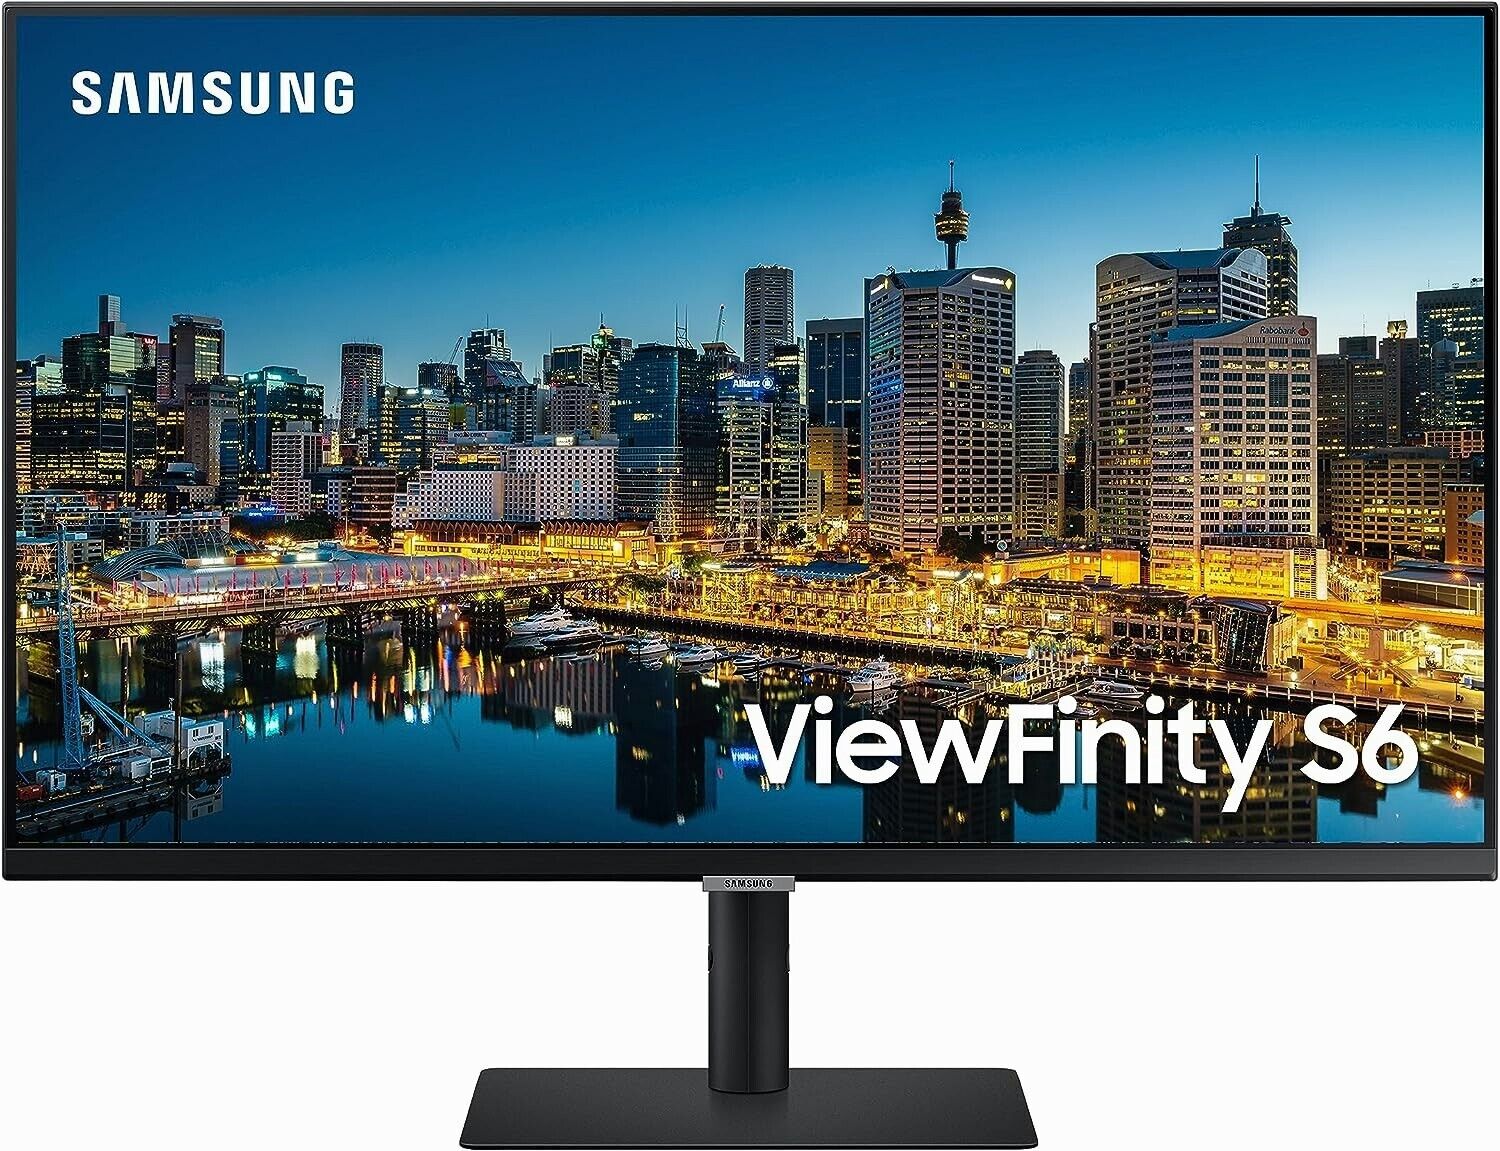 SAMSUNG 32-Inch Viewfinity QHD 2K Computer Monitor, Fully Adjustable Stand